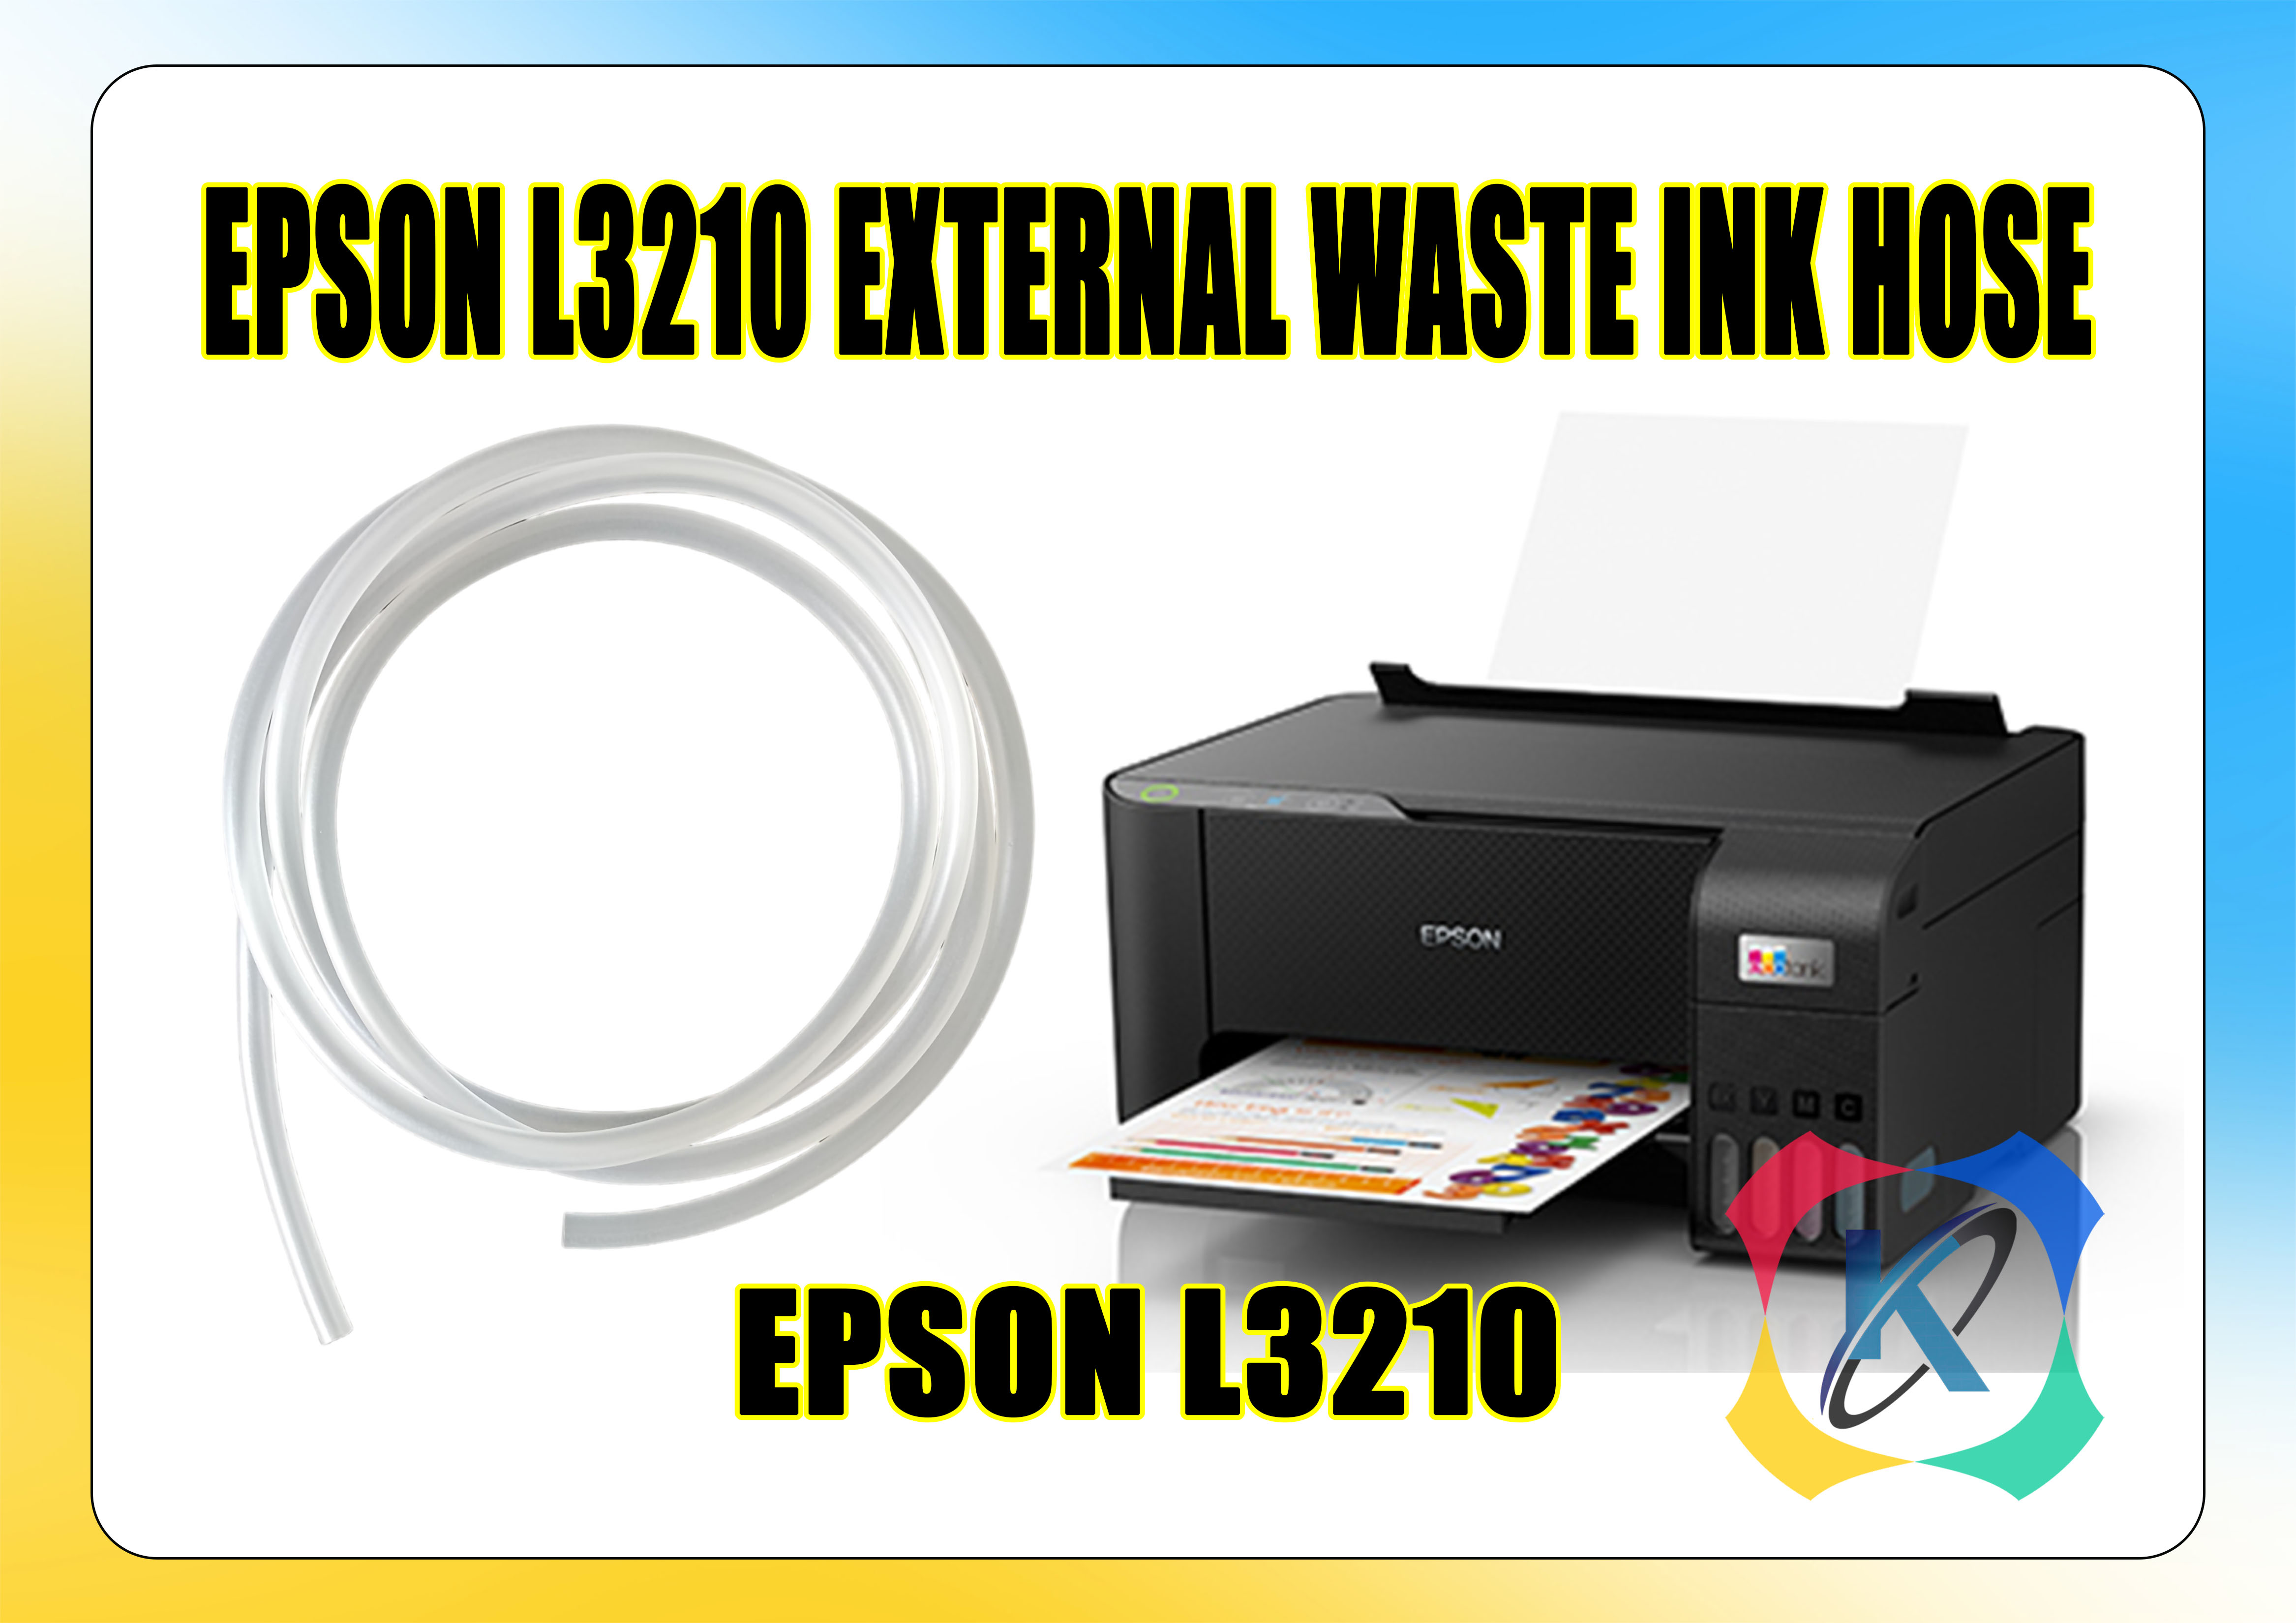 External Waste Ink Tank Fits: Epson XP-510, XP-520, 530, 540(kit only)